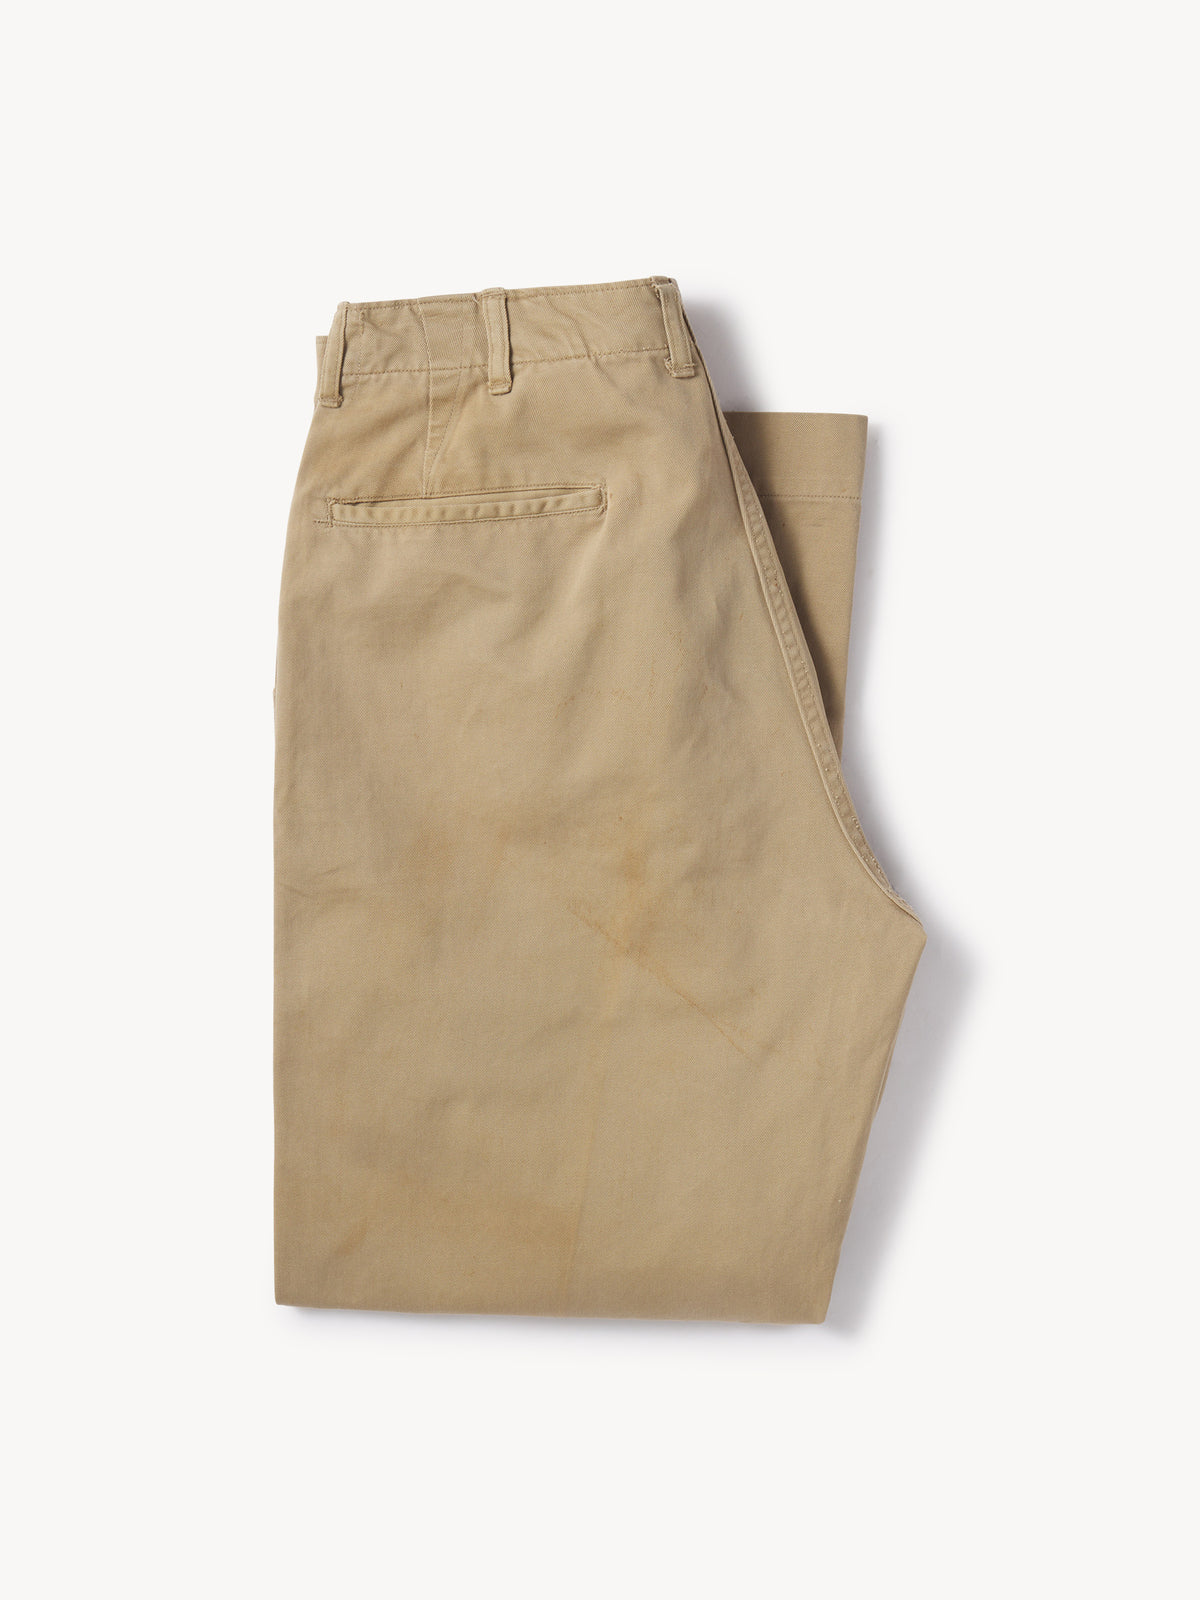 Military Chino, Button Fly - 0019 - Product flat